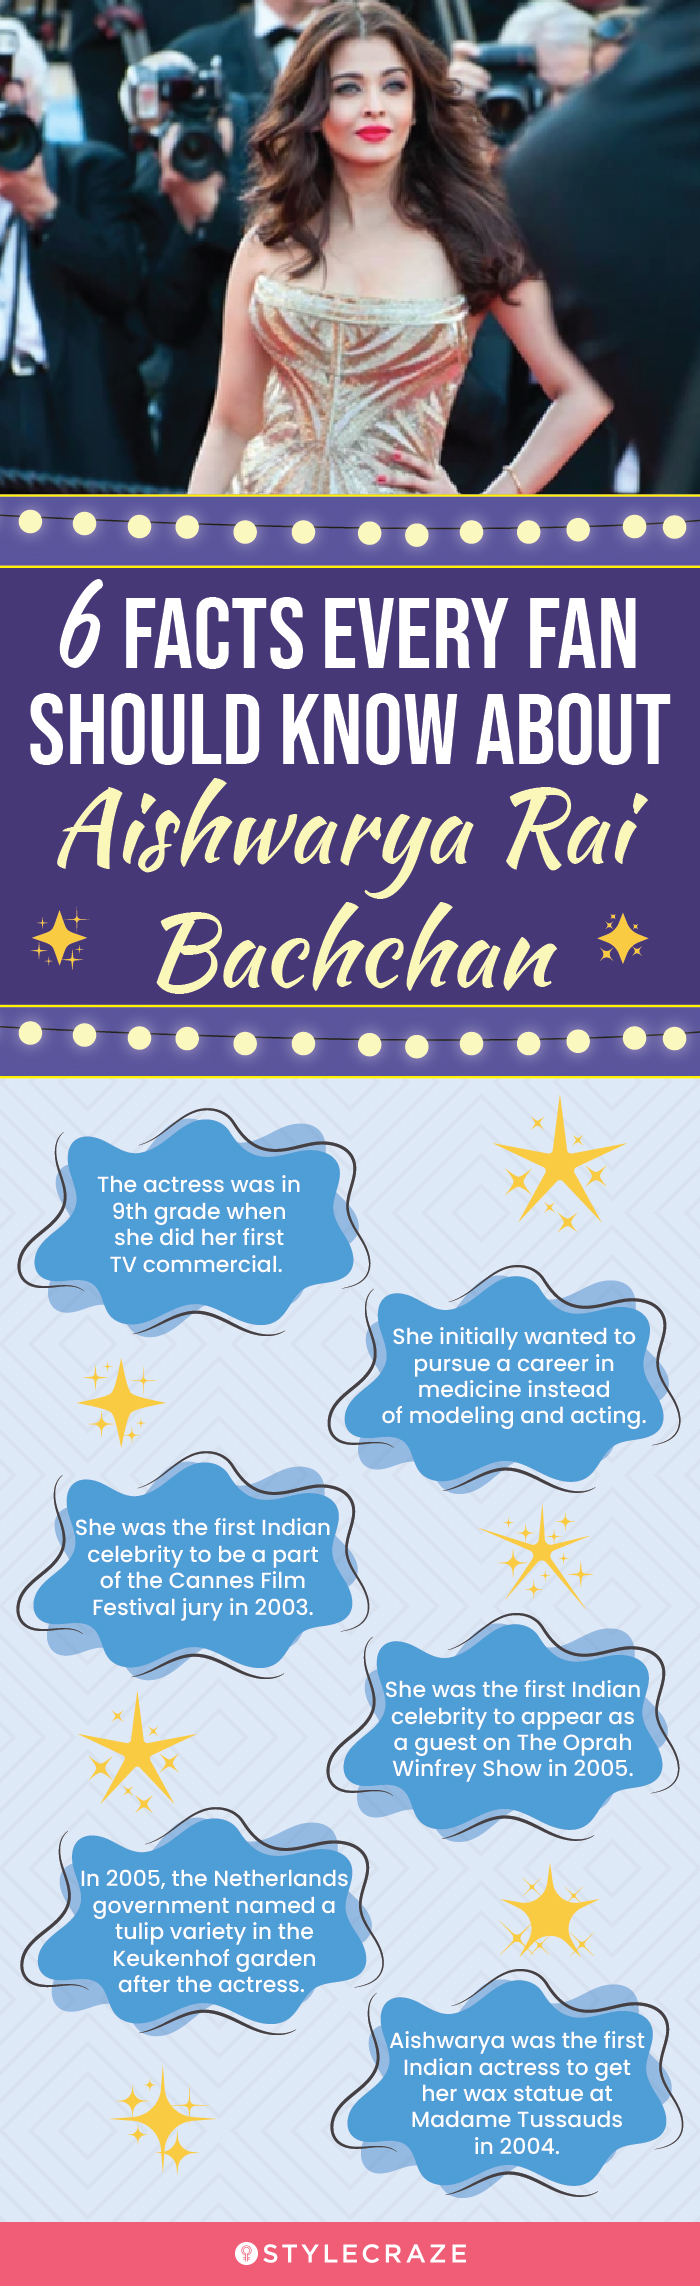 6 facts every fan should know about aishwarya rai bachchan(infographic)